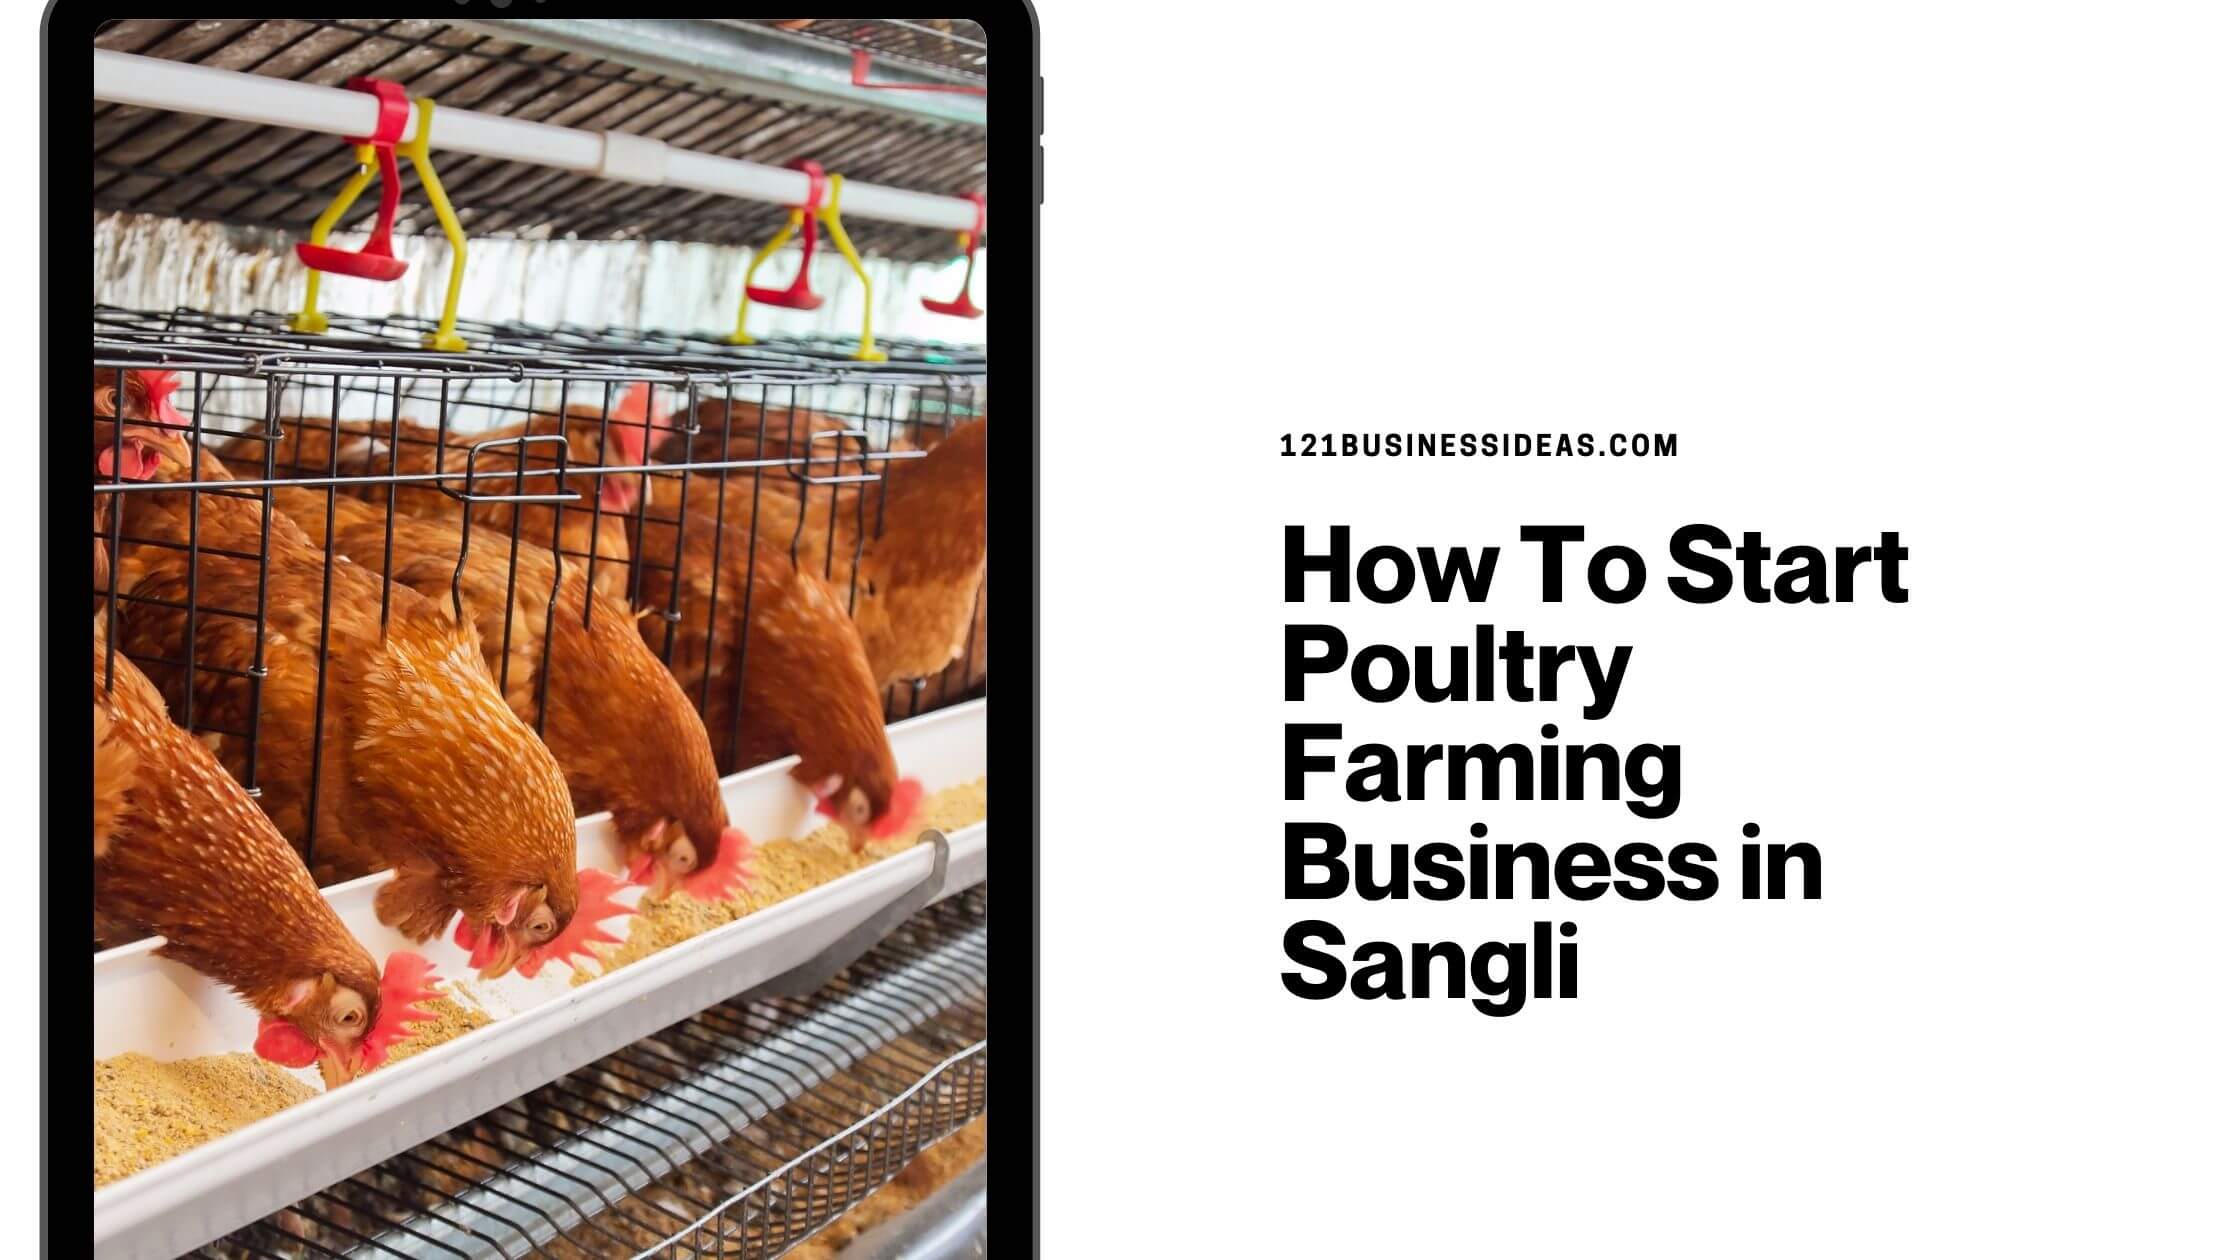 How To Start Poultry Farming Business in Sangli (1)